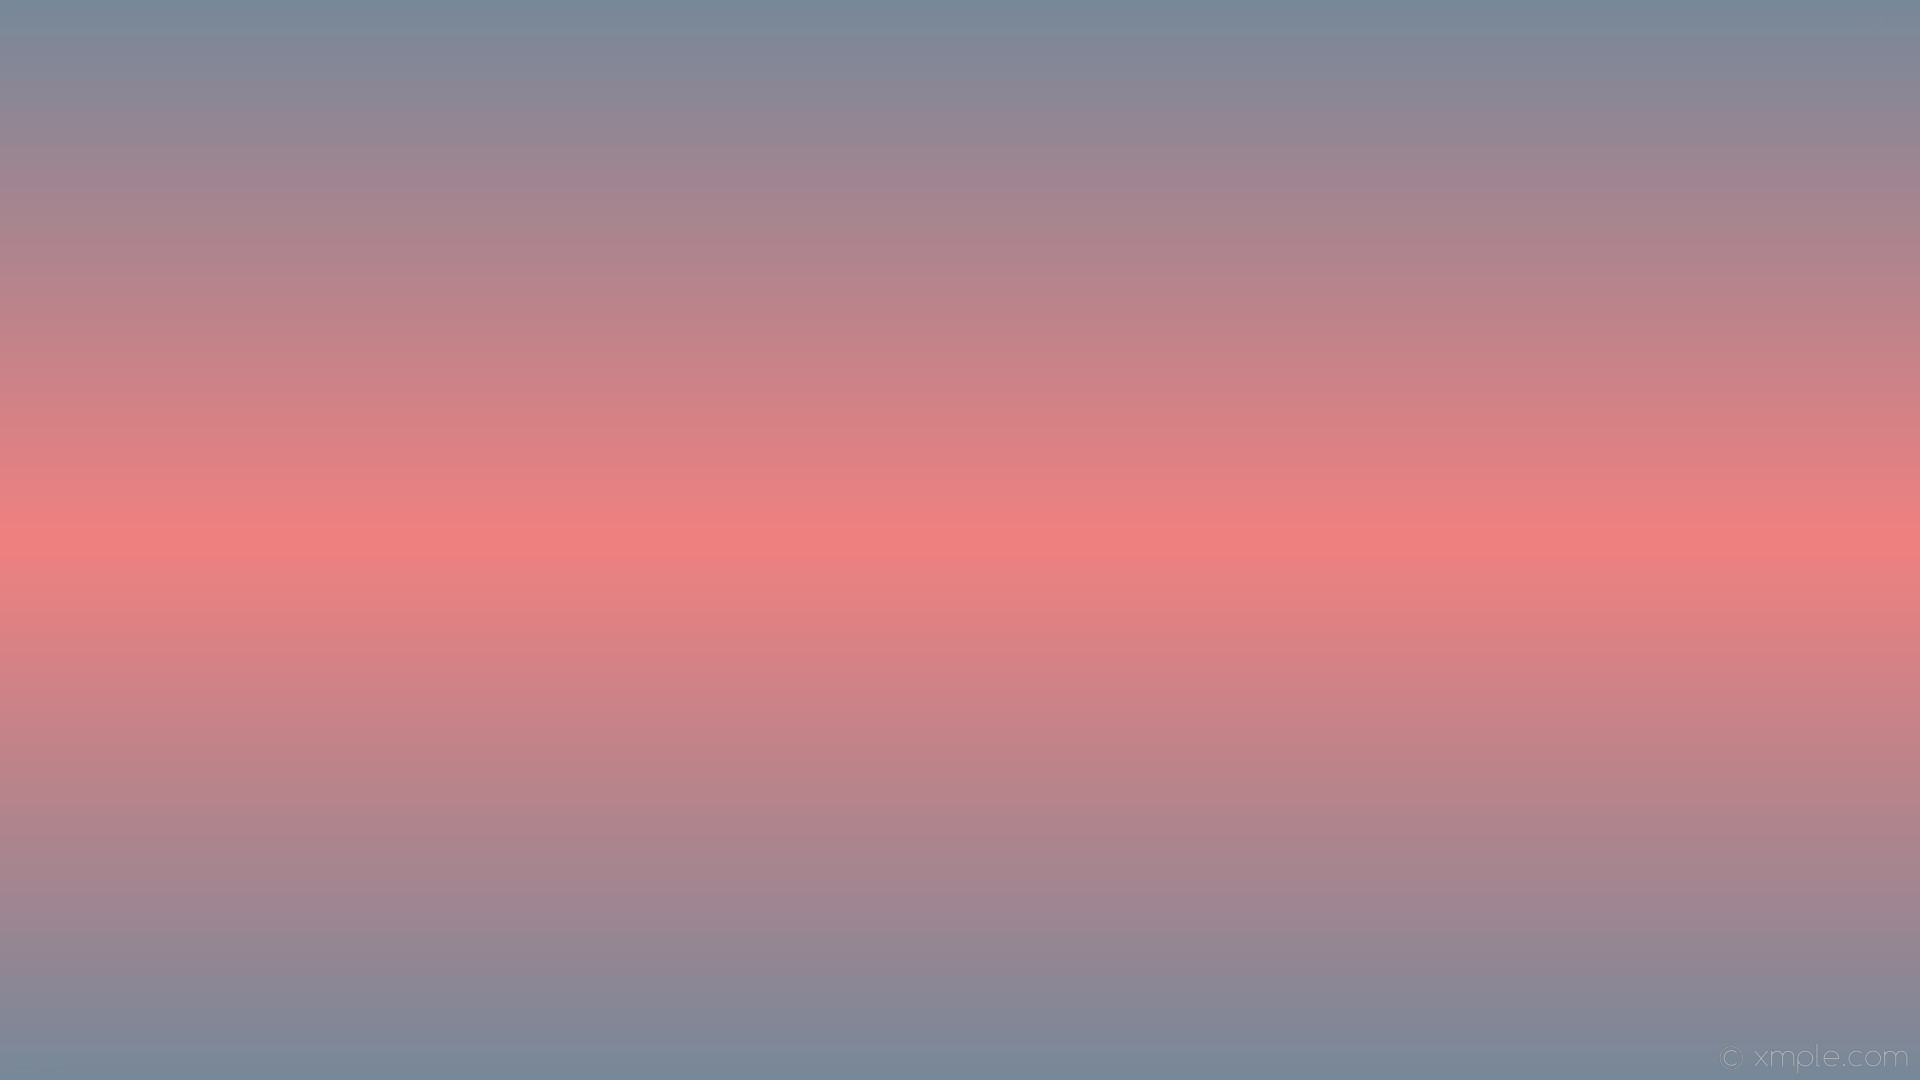 Wallpaper Linear Gradient Highlight Red Grey Light And Grey Gradient Background